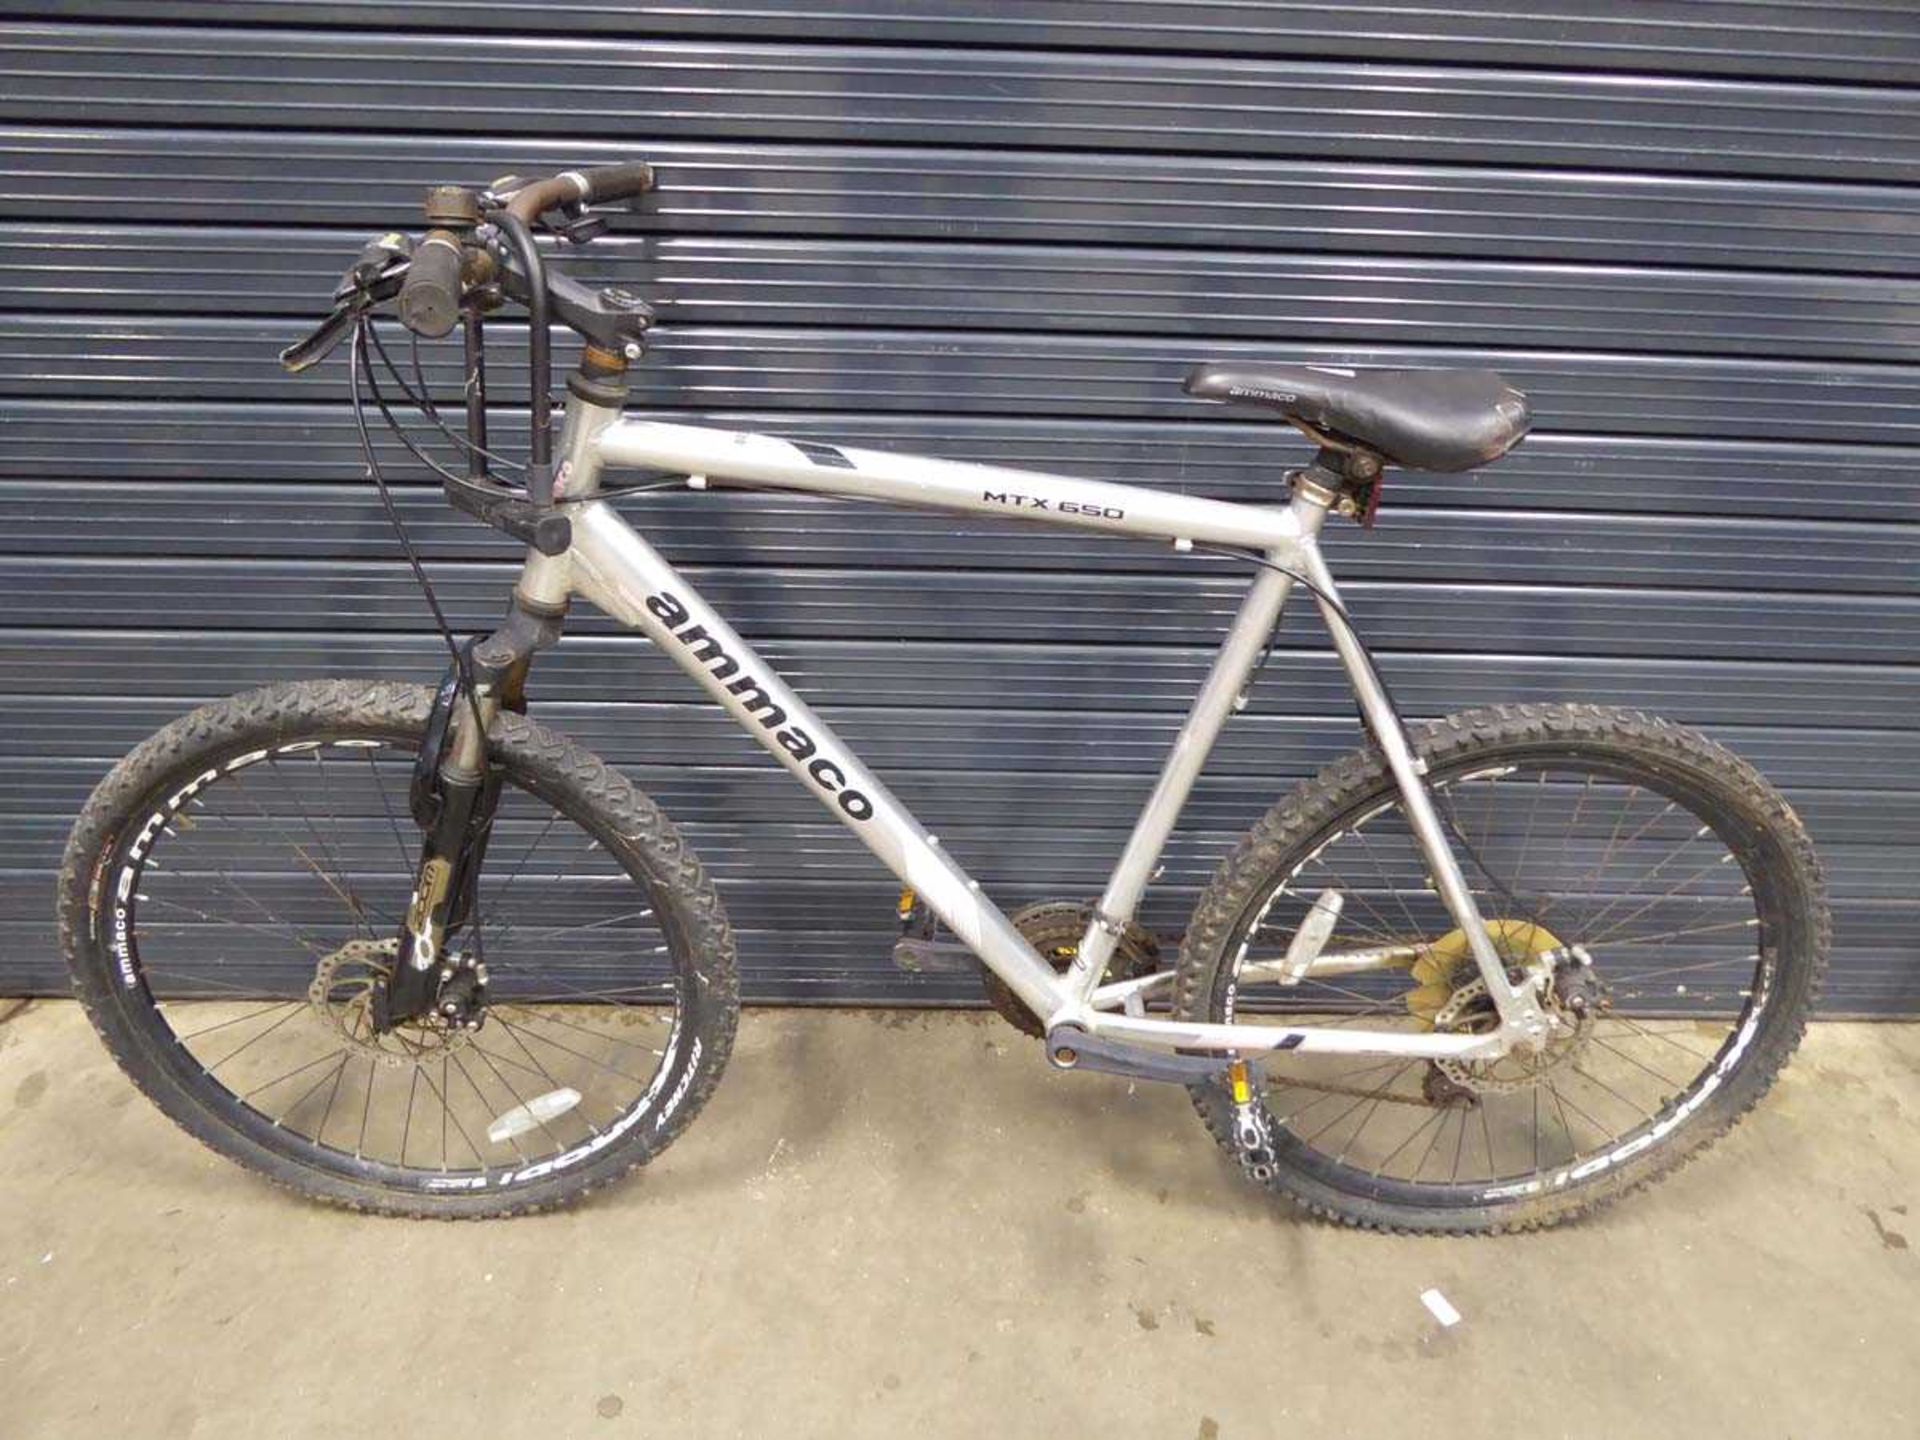 Ammaco silver gents mountain bike - Image 3 of 3